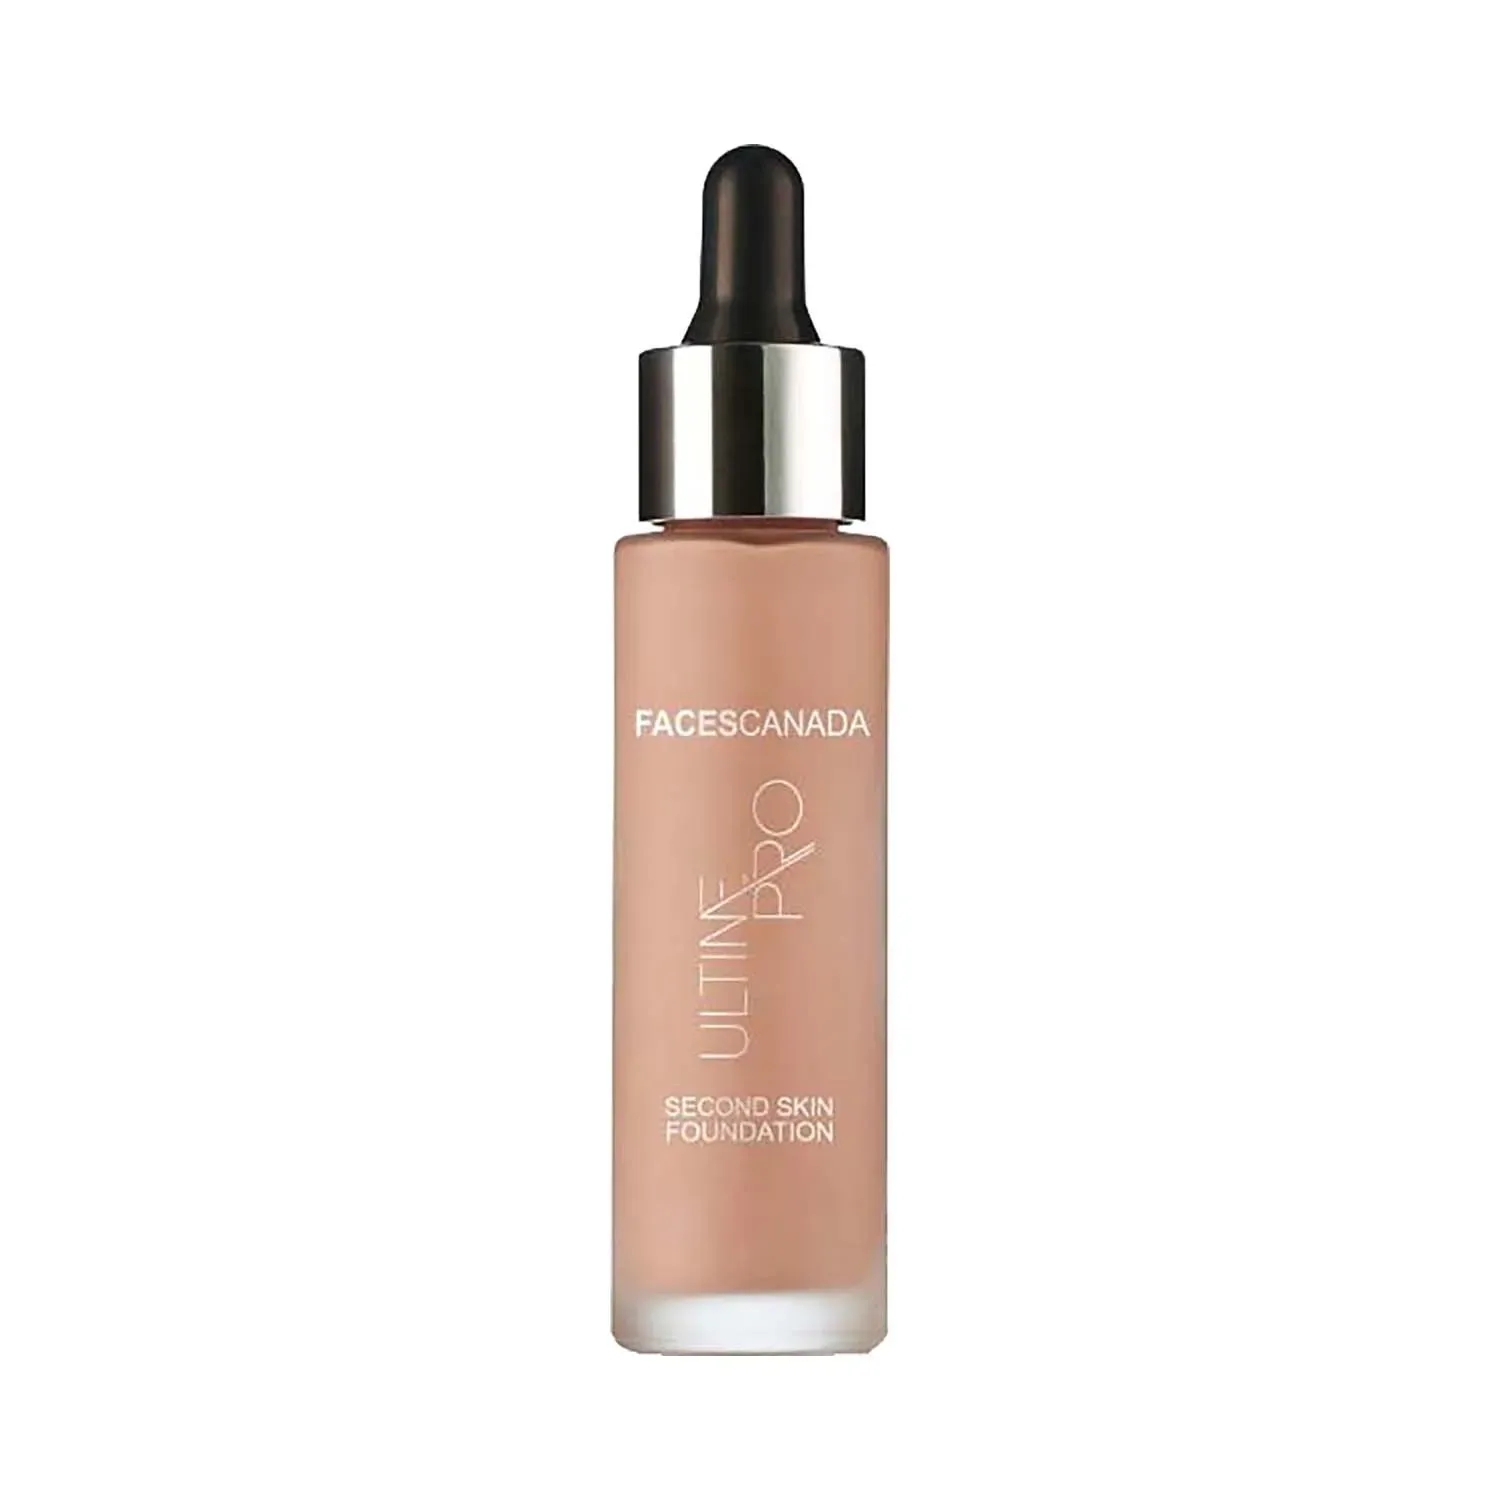 Faces Canada | Faces Canada Ultime Pro Second Skin Foundation - 03 Beige (30ml)